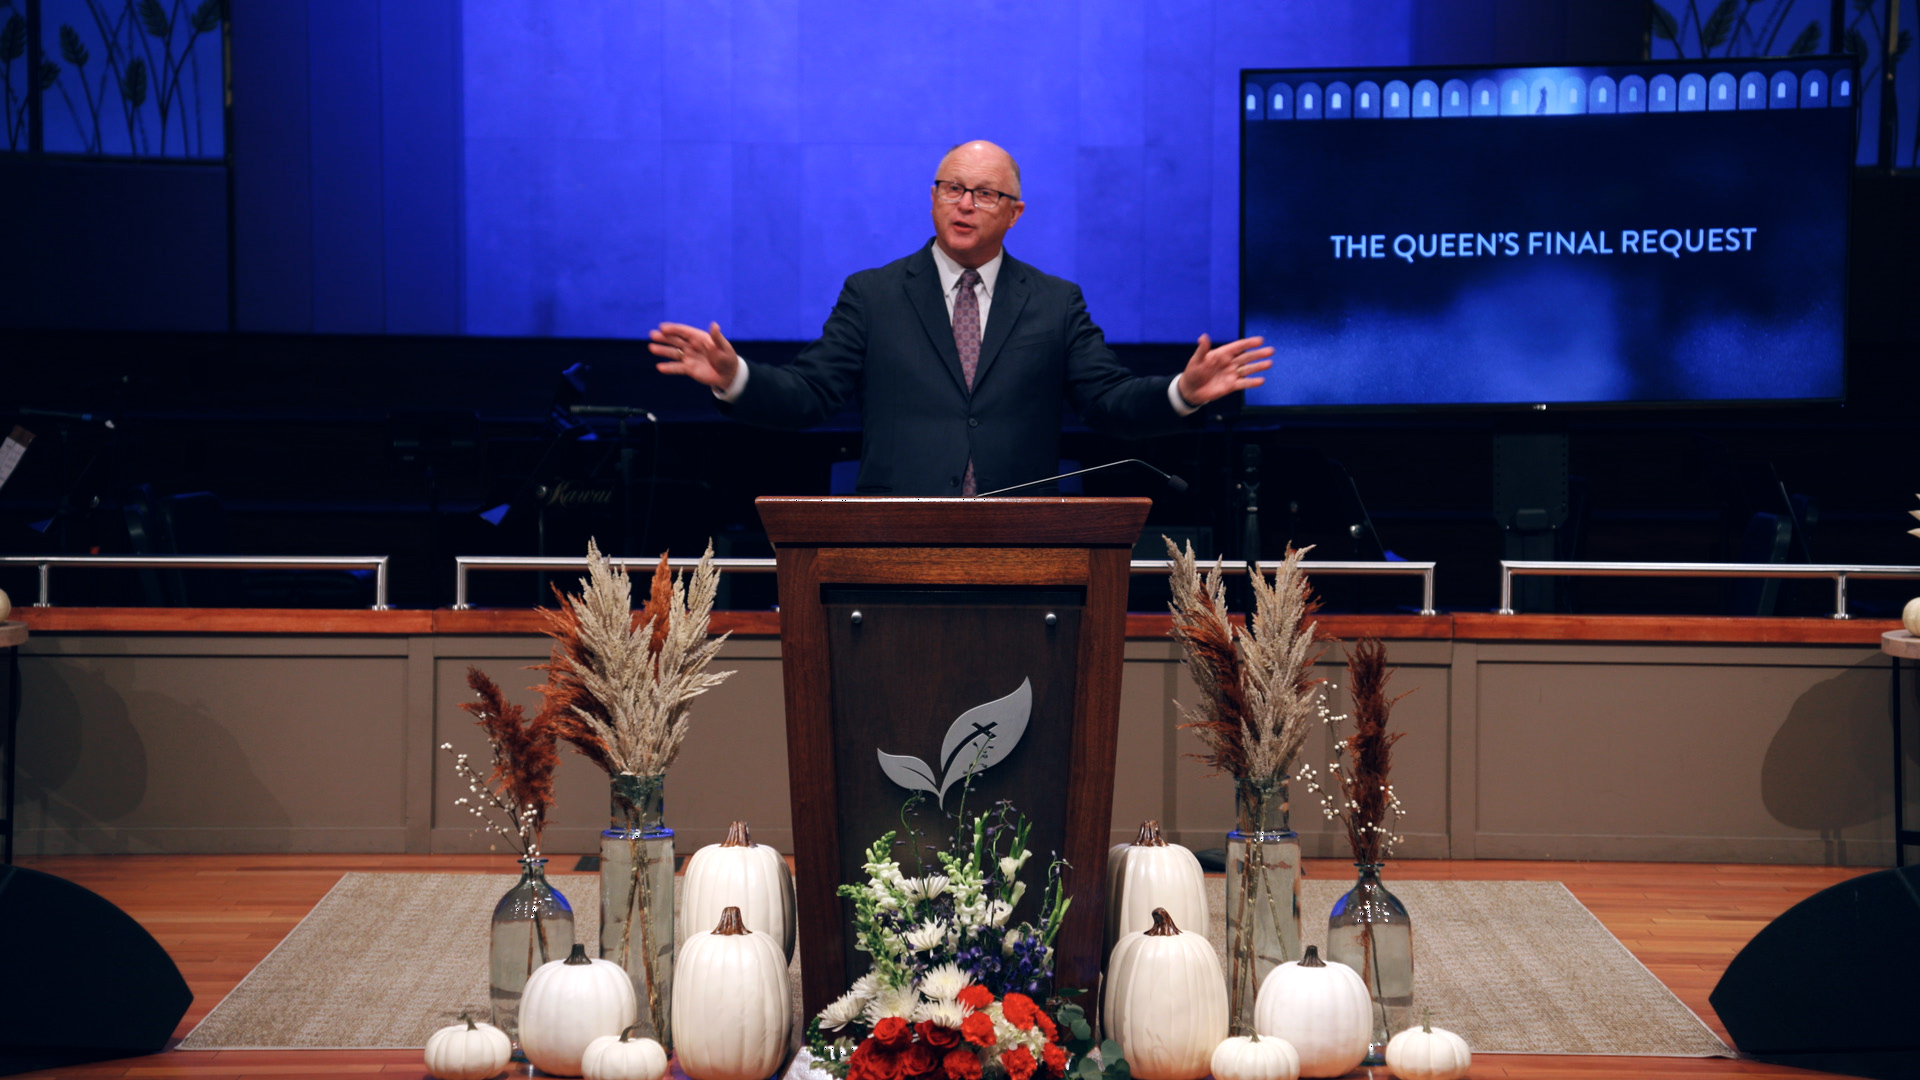 Pastor Paul Chappell: From Mourning to a Good Day